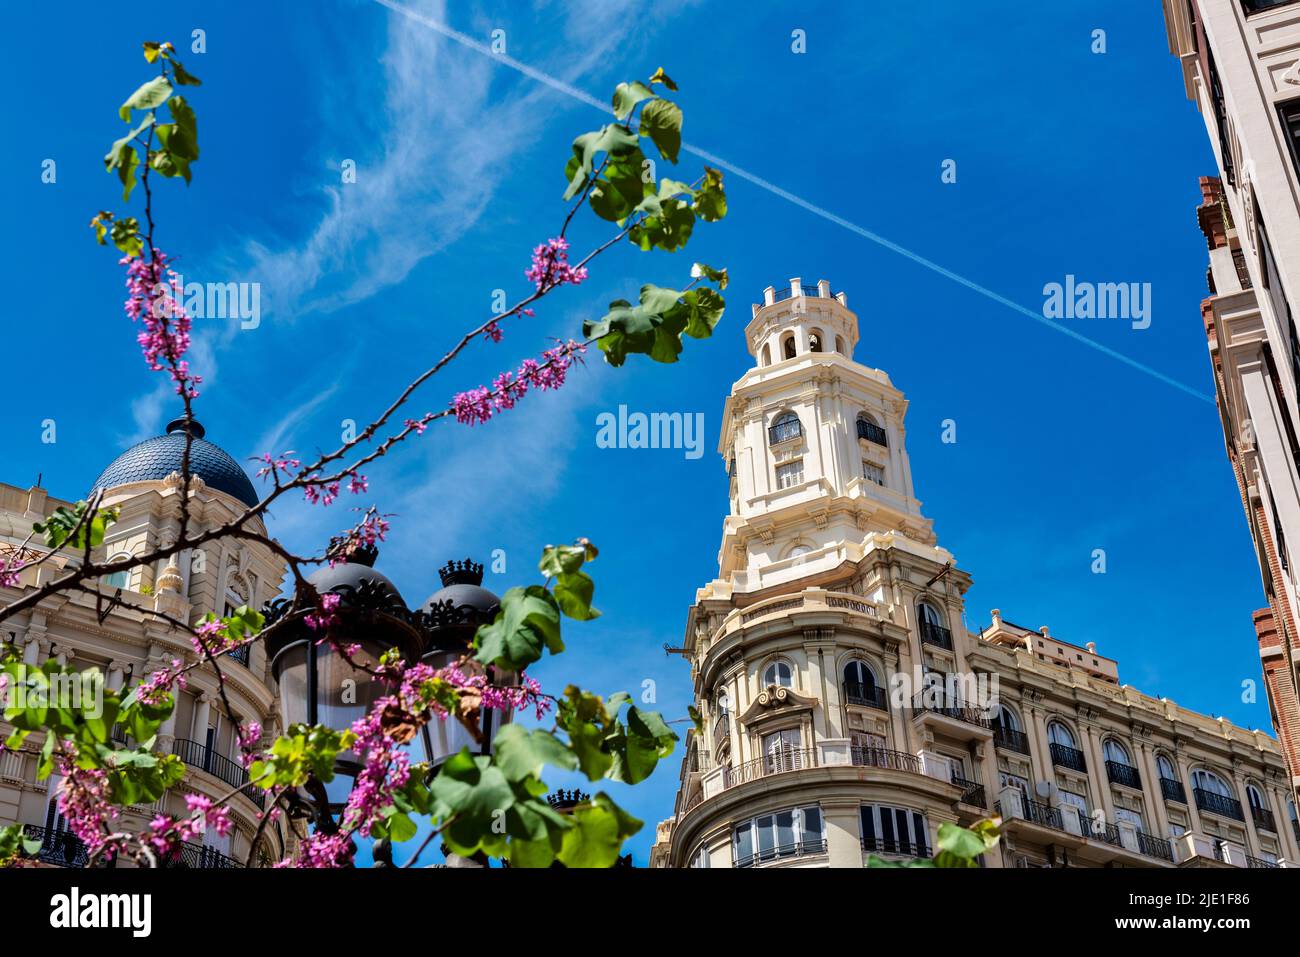 One of the many ornate and beautiful buildings in Valencia in Spain Stock Photo